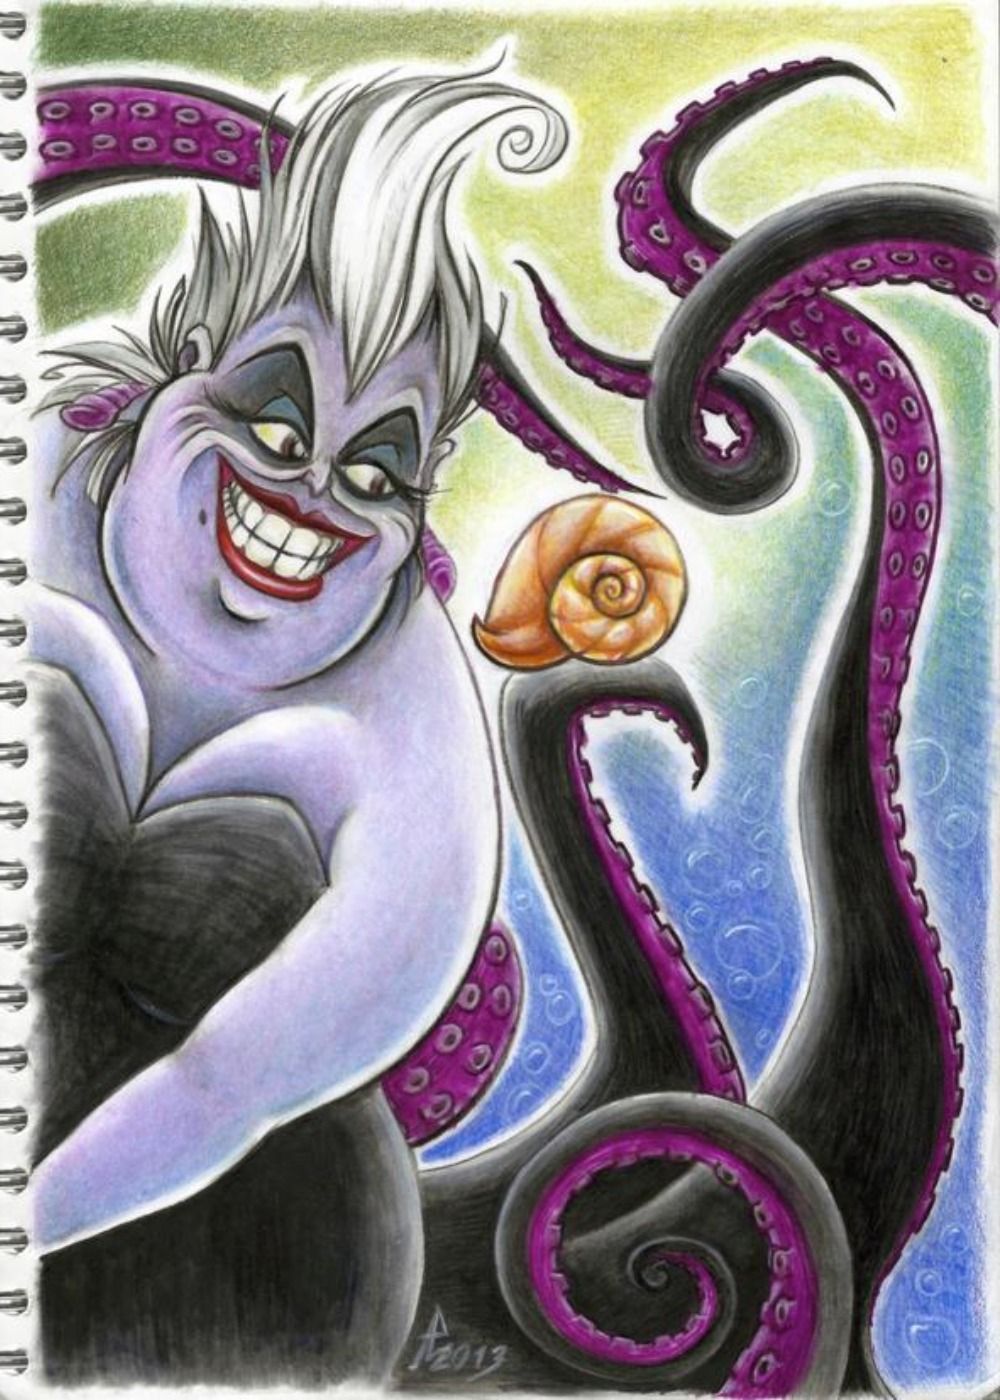 The Little Mermaid 10 Pieces Of Ursula Fan Art That Look Sinister